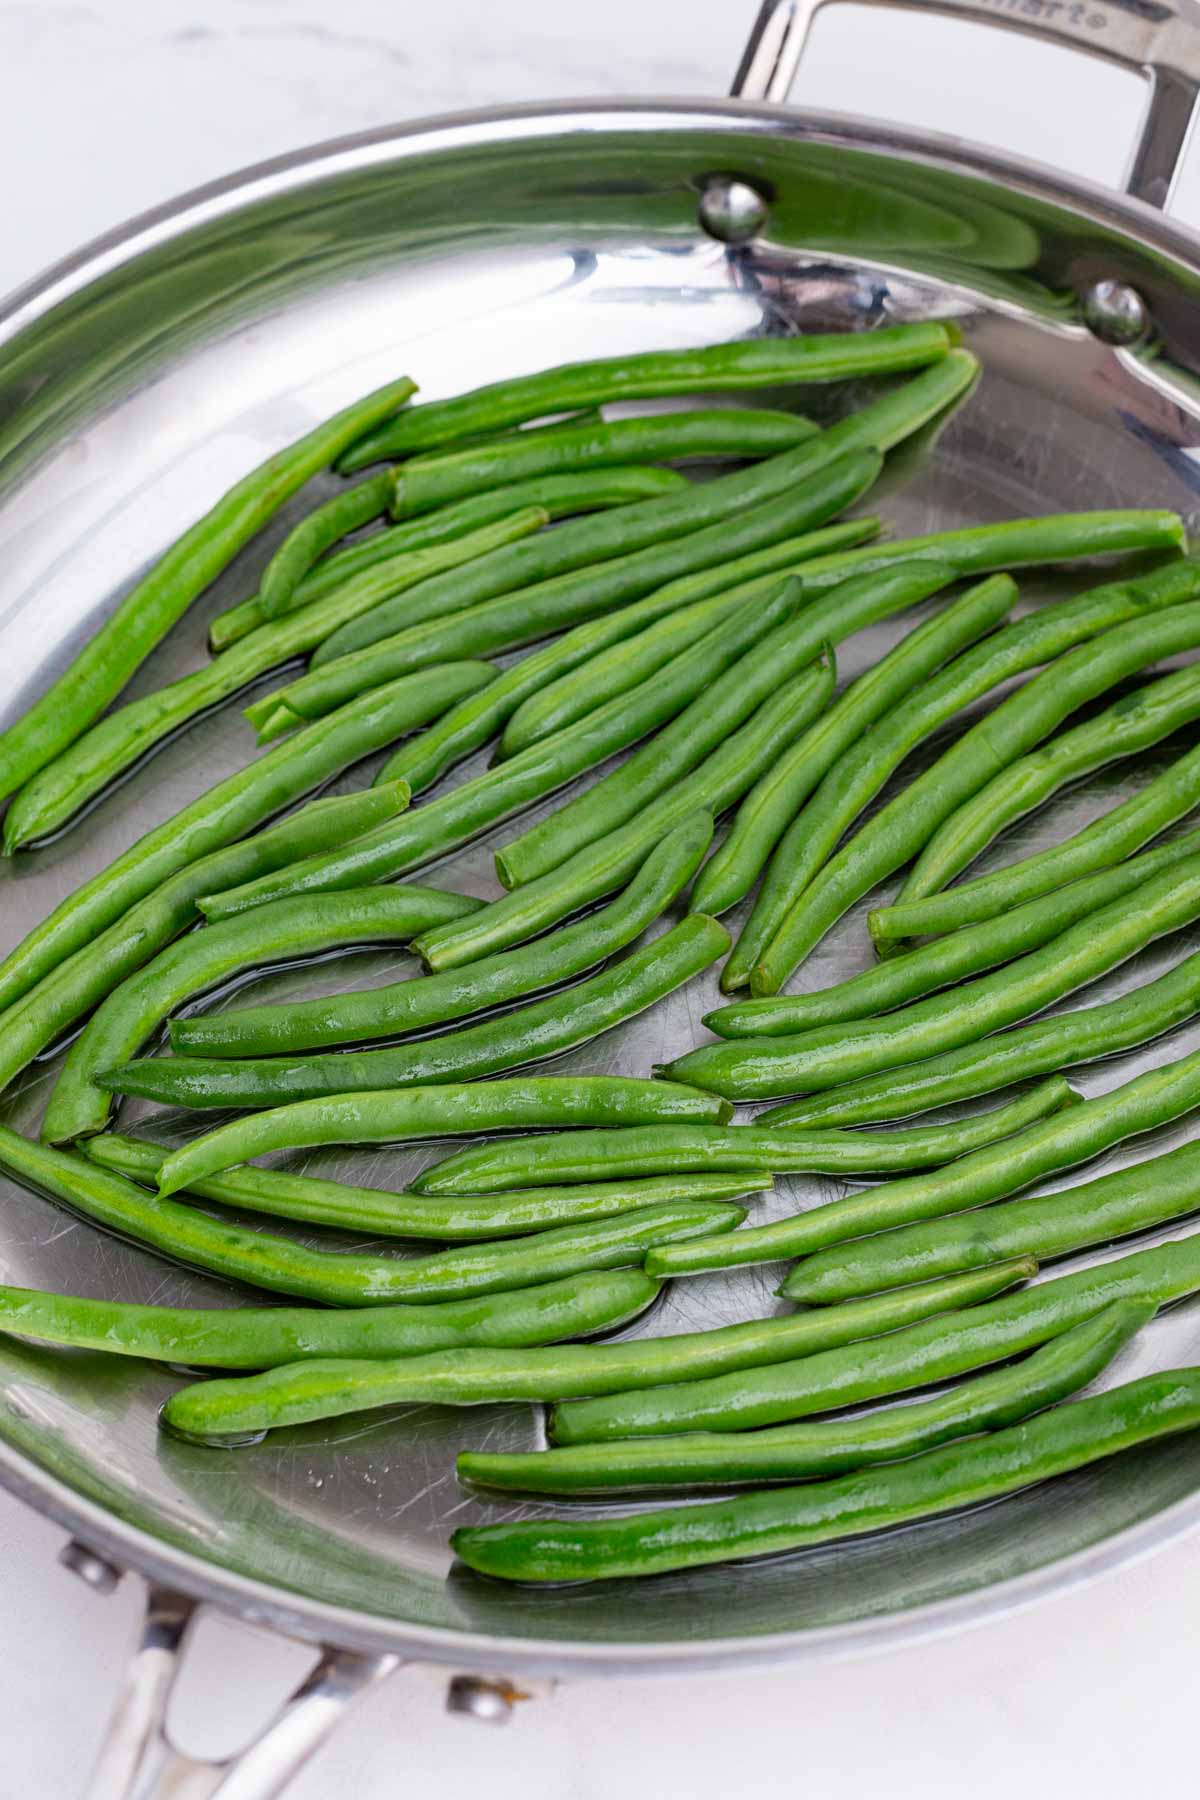 Green beans are cooked in a skillet.